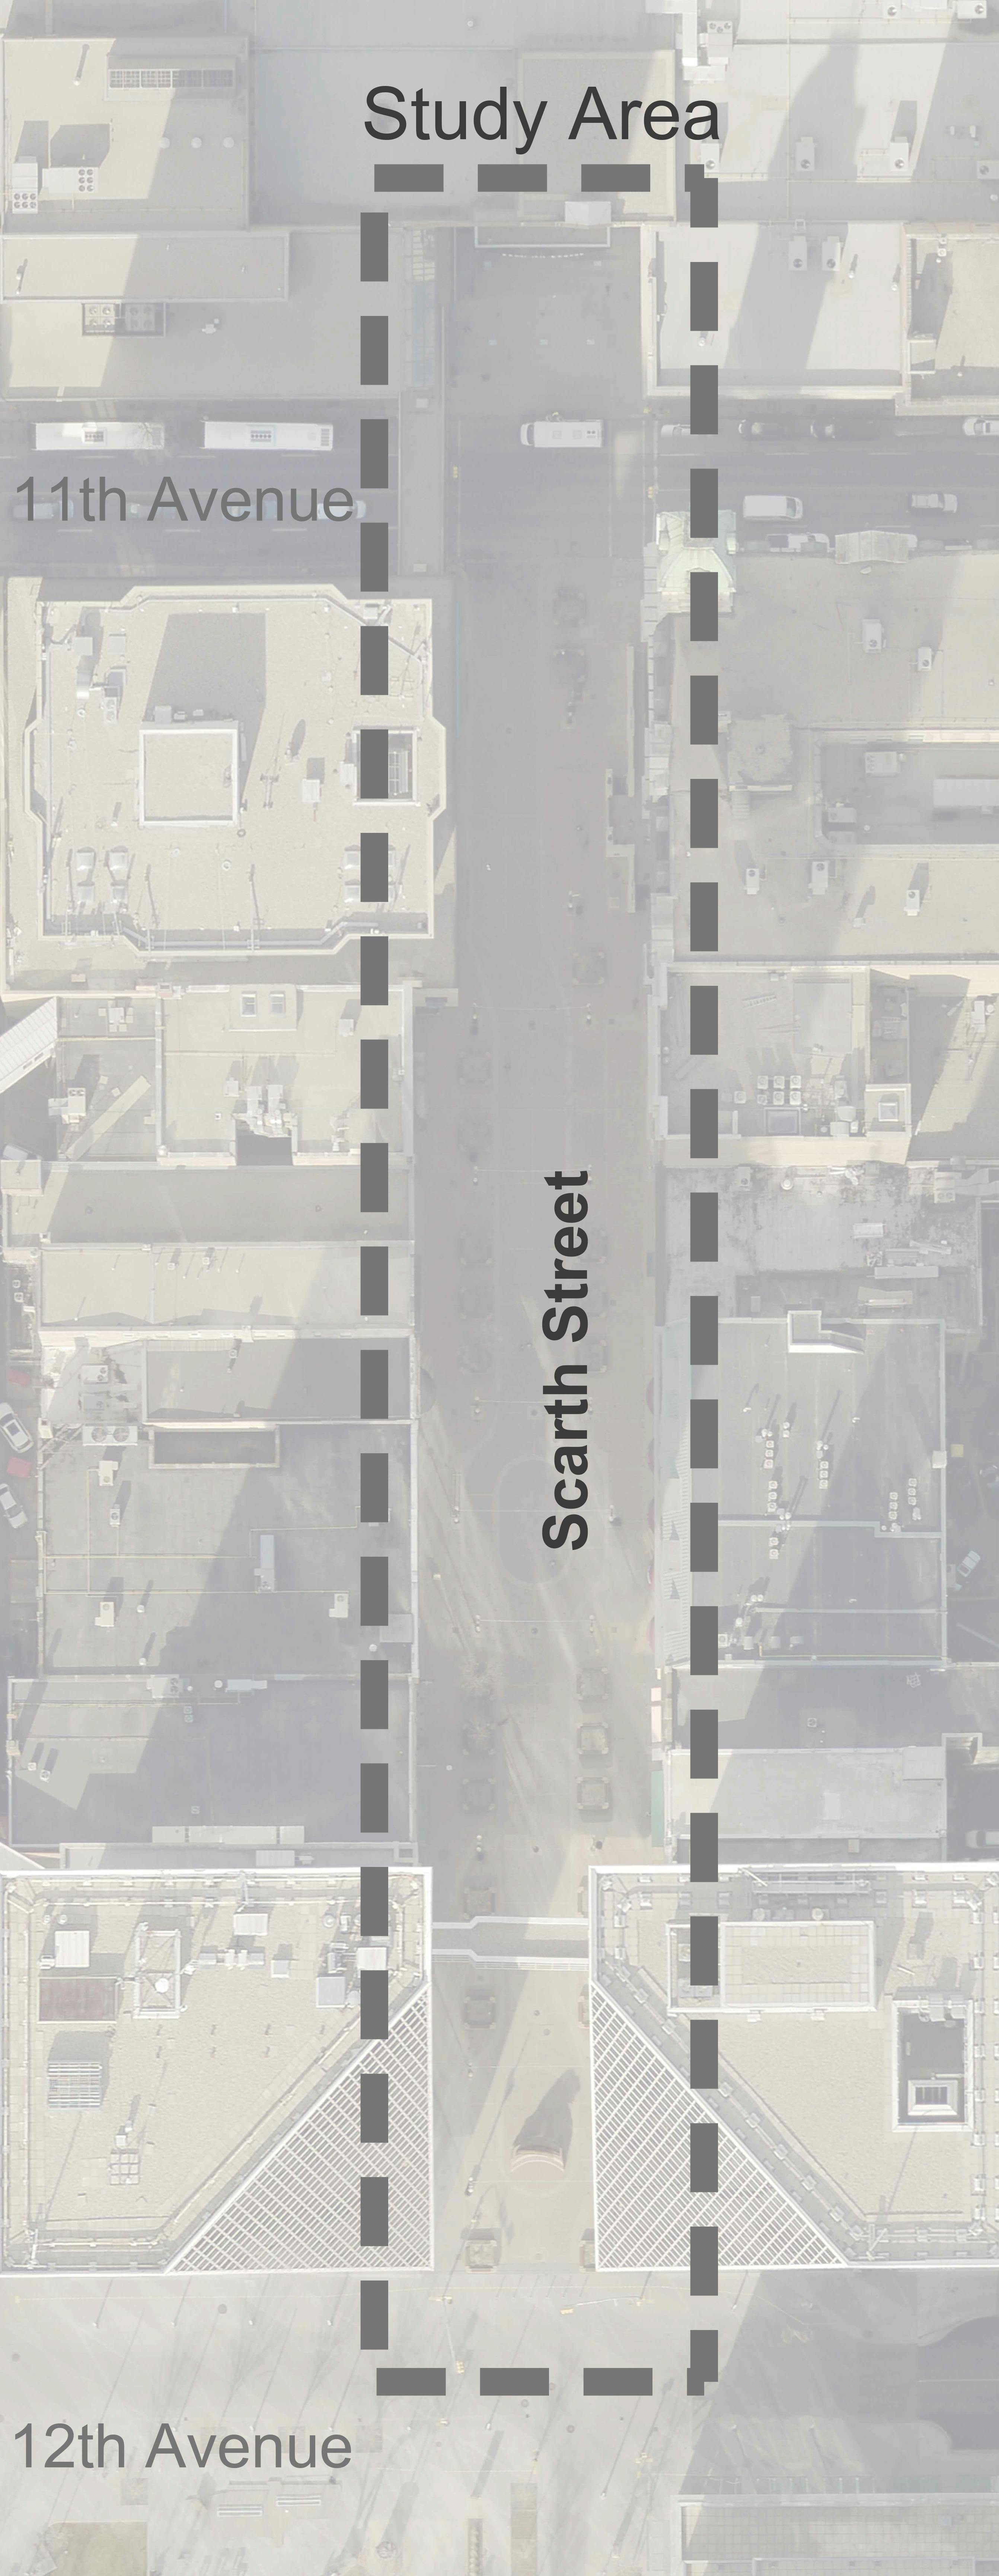 Scarth Street aerial view